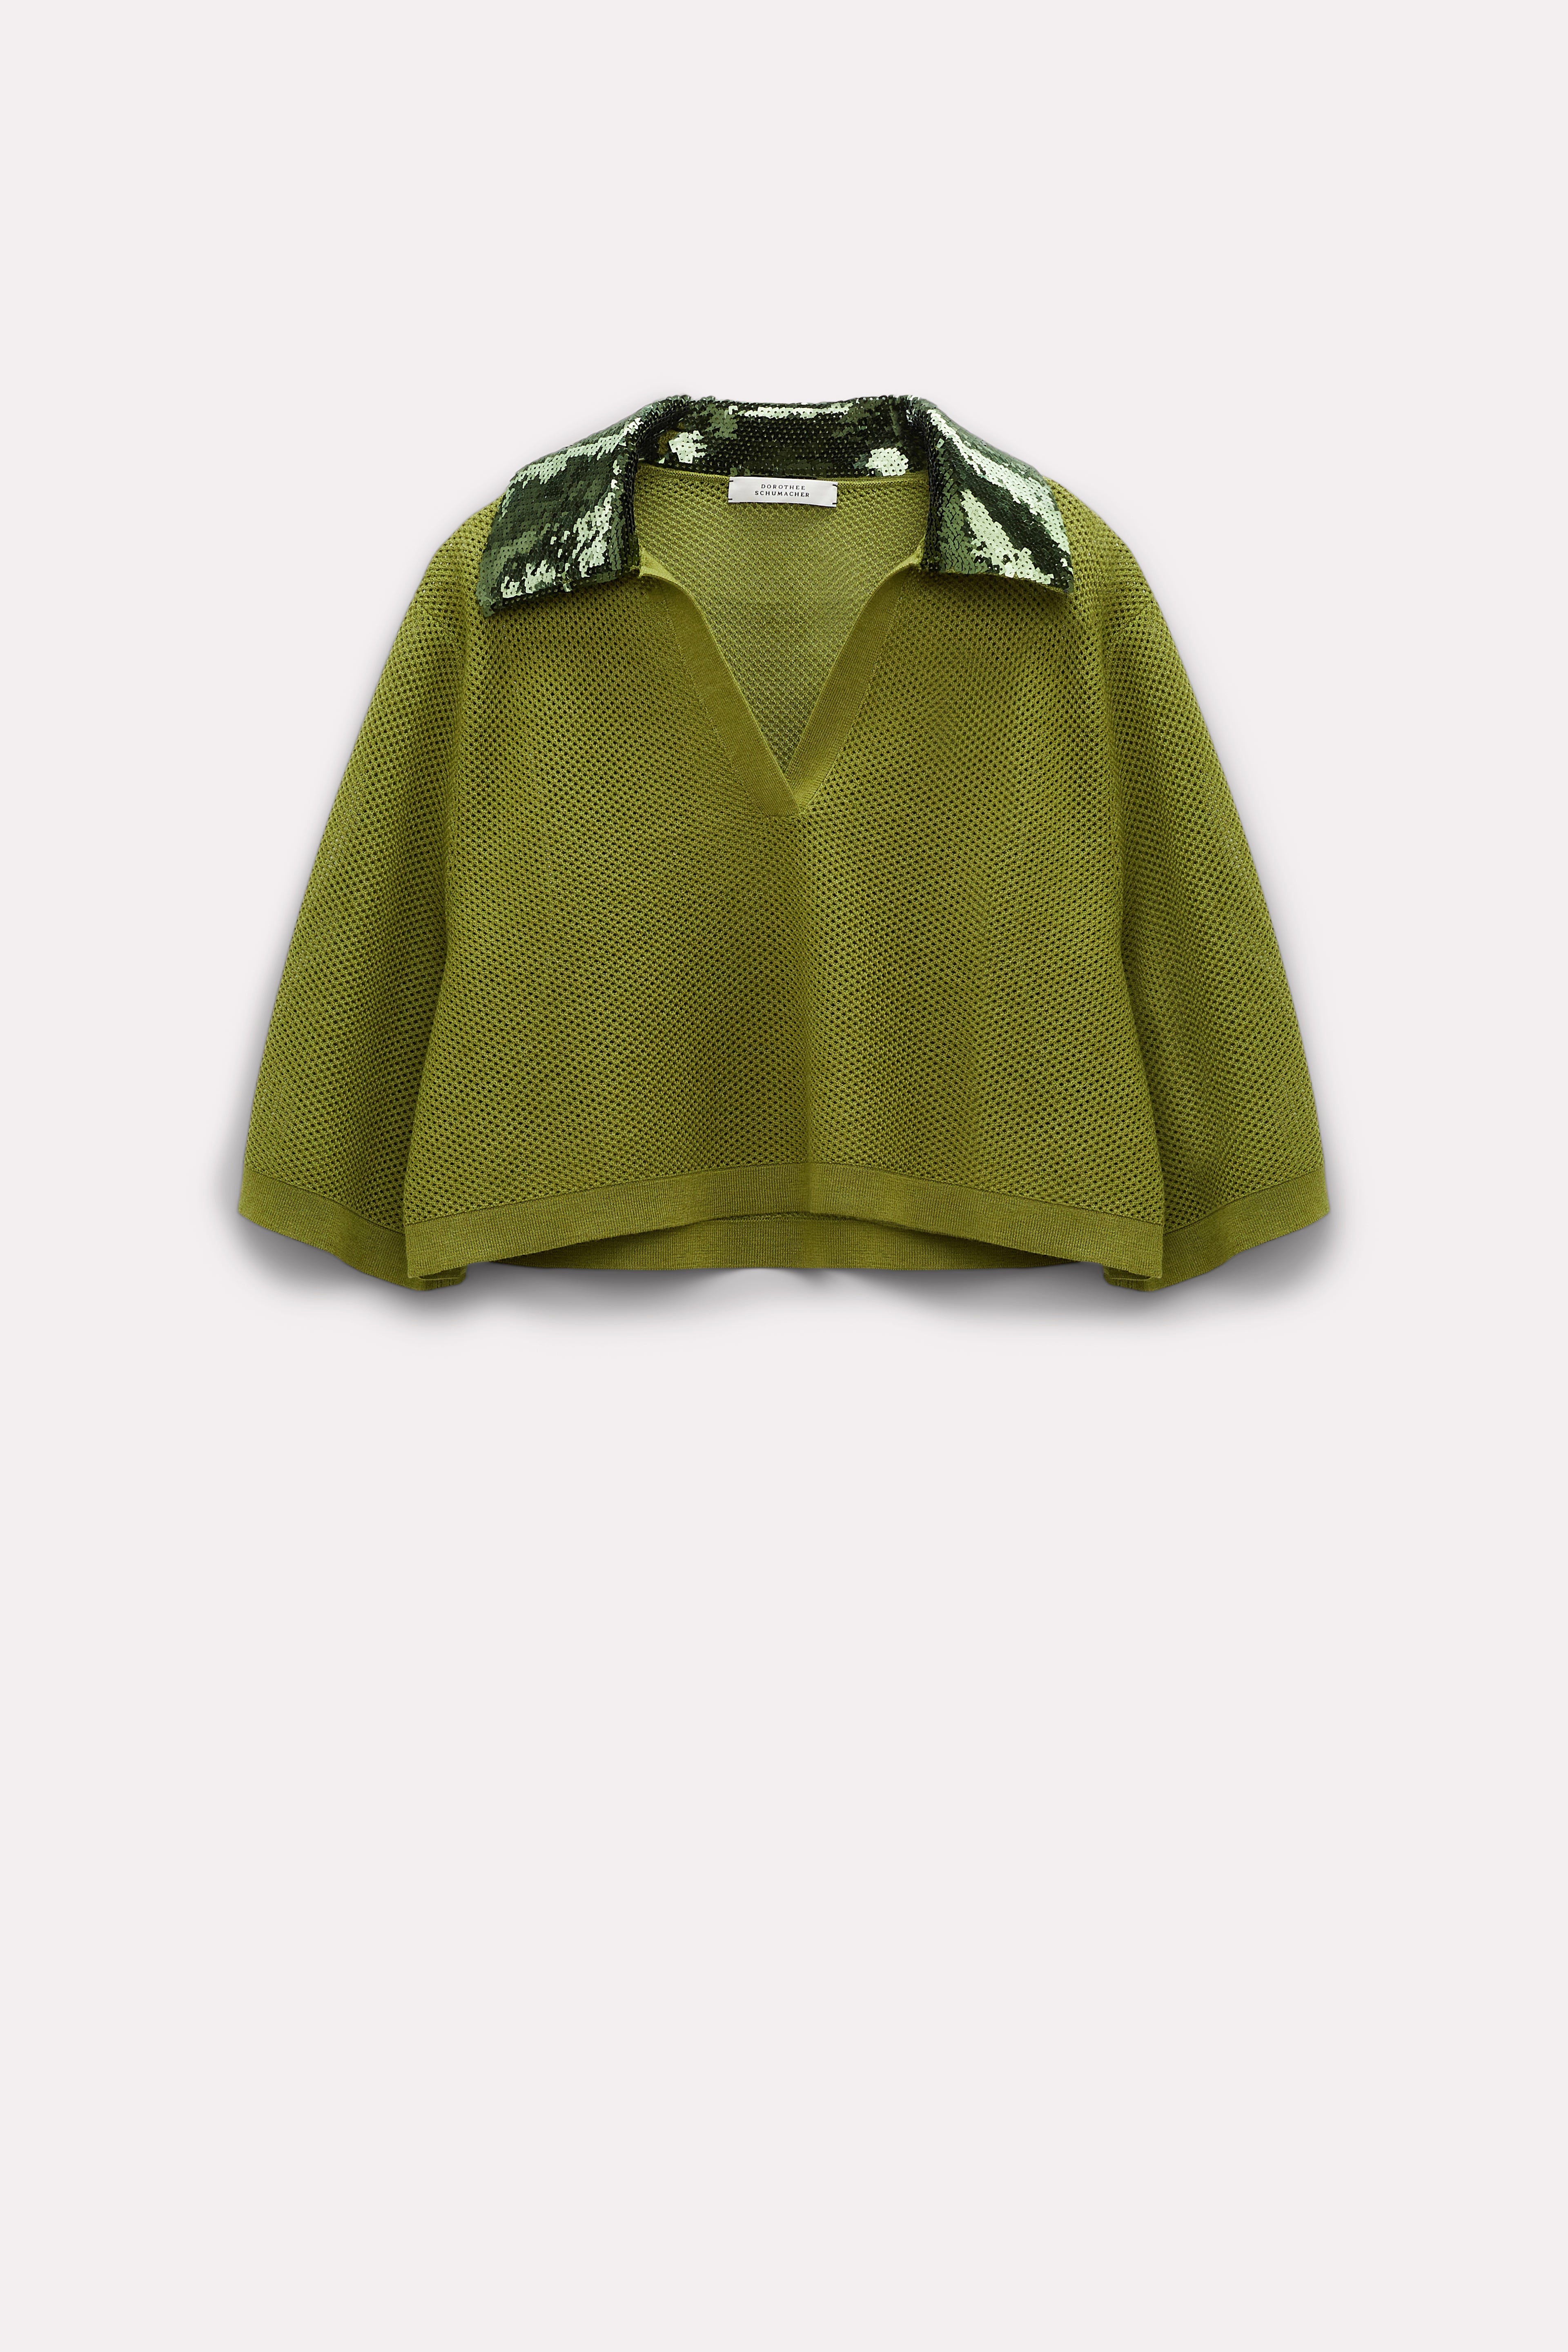 Dorothee-Schumacher-OUTLET-SALE-ESSENTIAL-EASE-pullover-Strick-ARCHIVE-COLLECTION.jpg